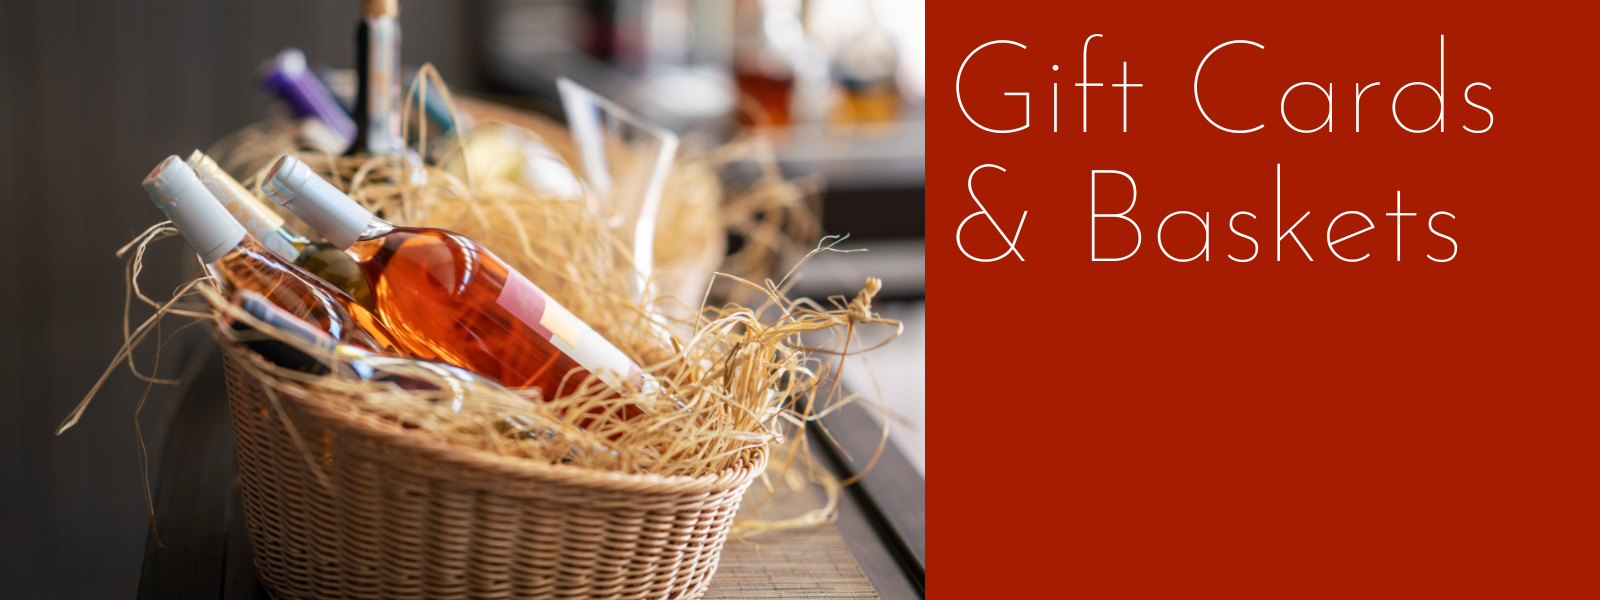 Gift Cards and Baskets